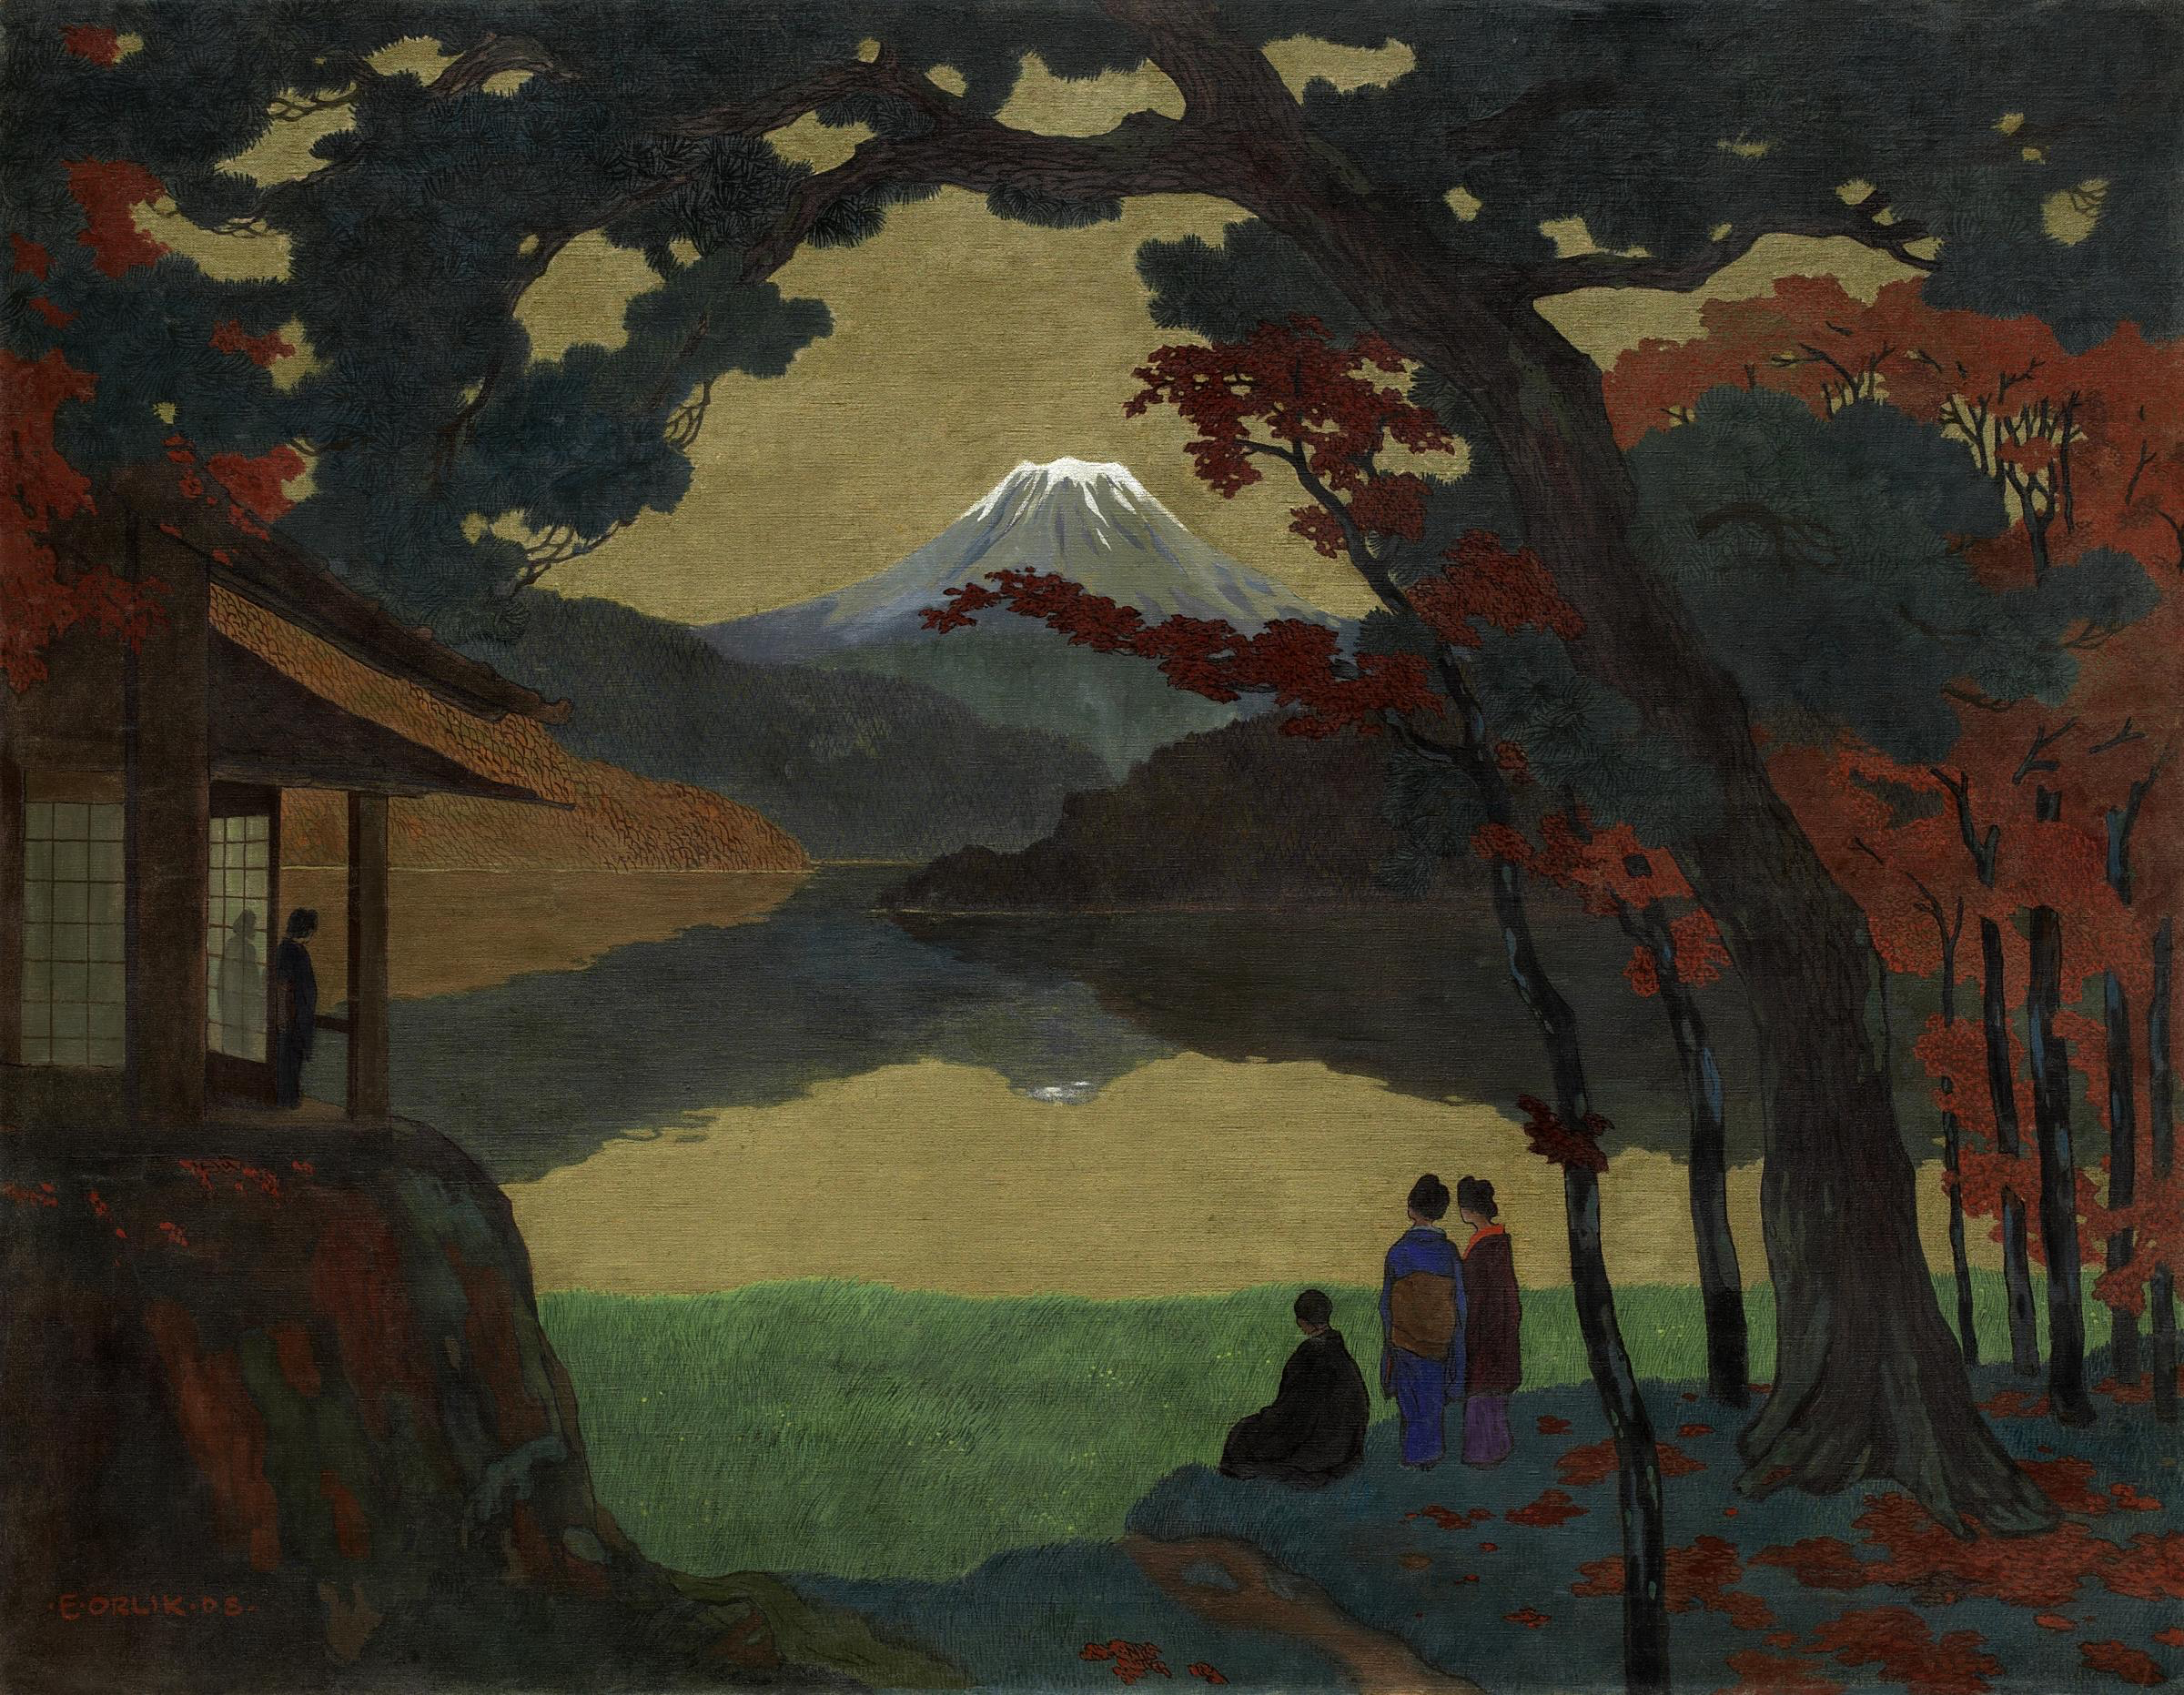 Landscape With Mount Fuji in the Distance by Emil Orlik - 1908 - 120.5 x 154.5 cm private collection